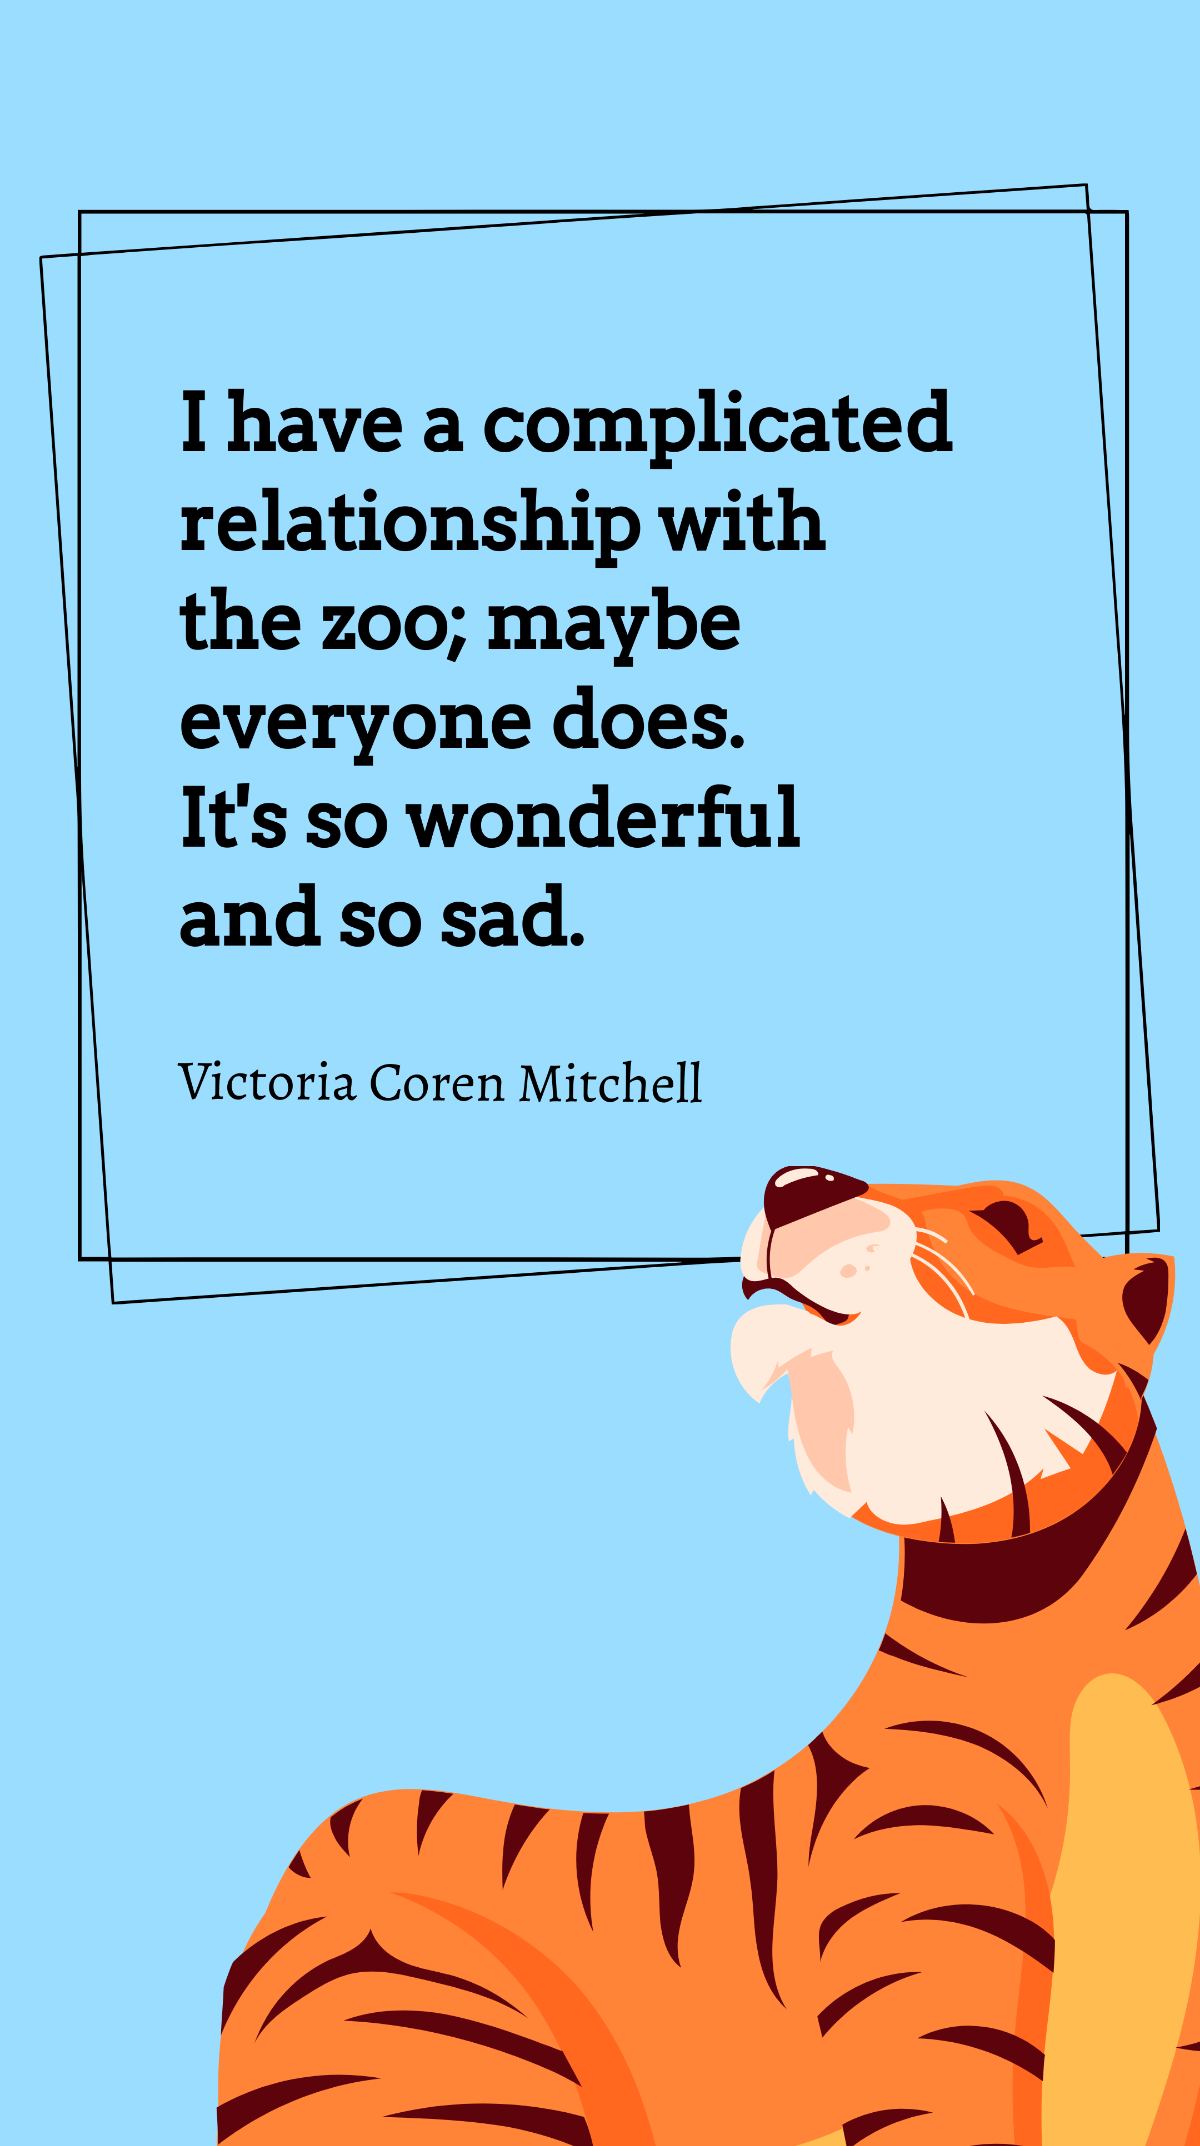 Victoria Coren Mitchell - I have a complicated relationship with the zoo; maybe everyone does. It's so wonderful and so sad. Template